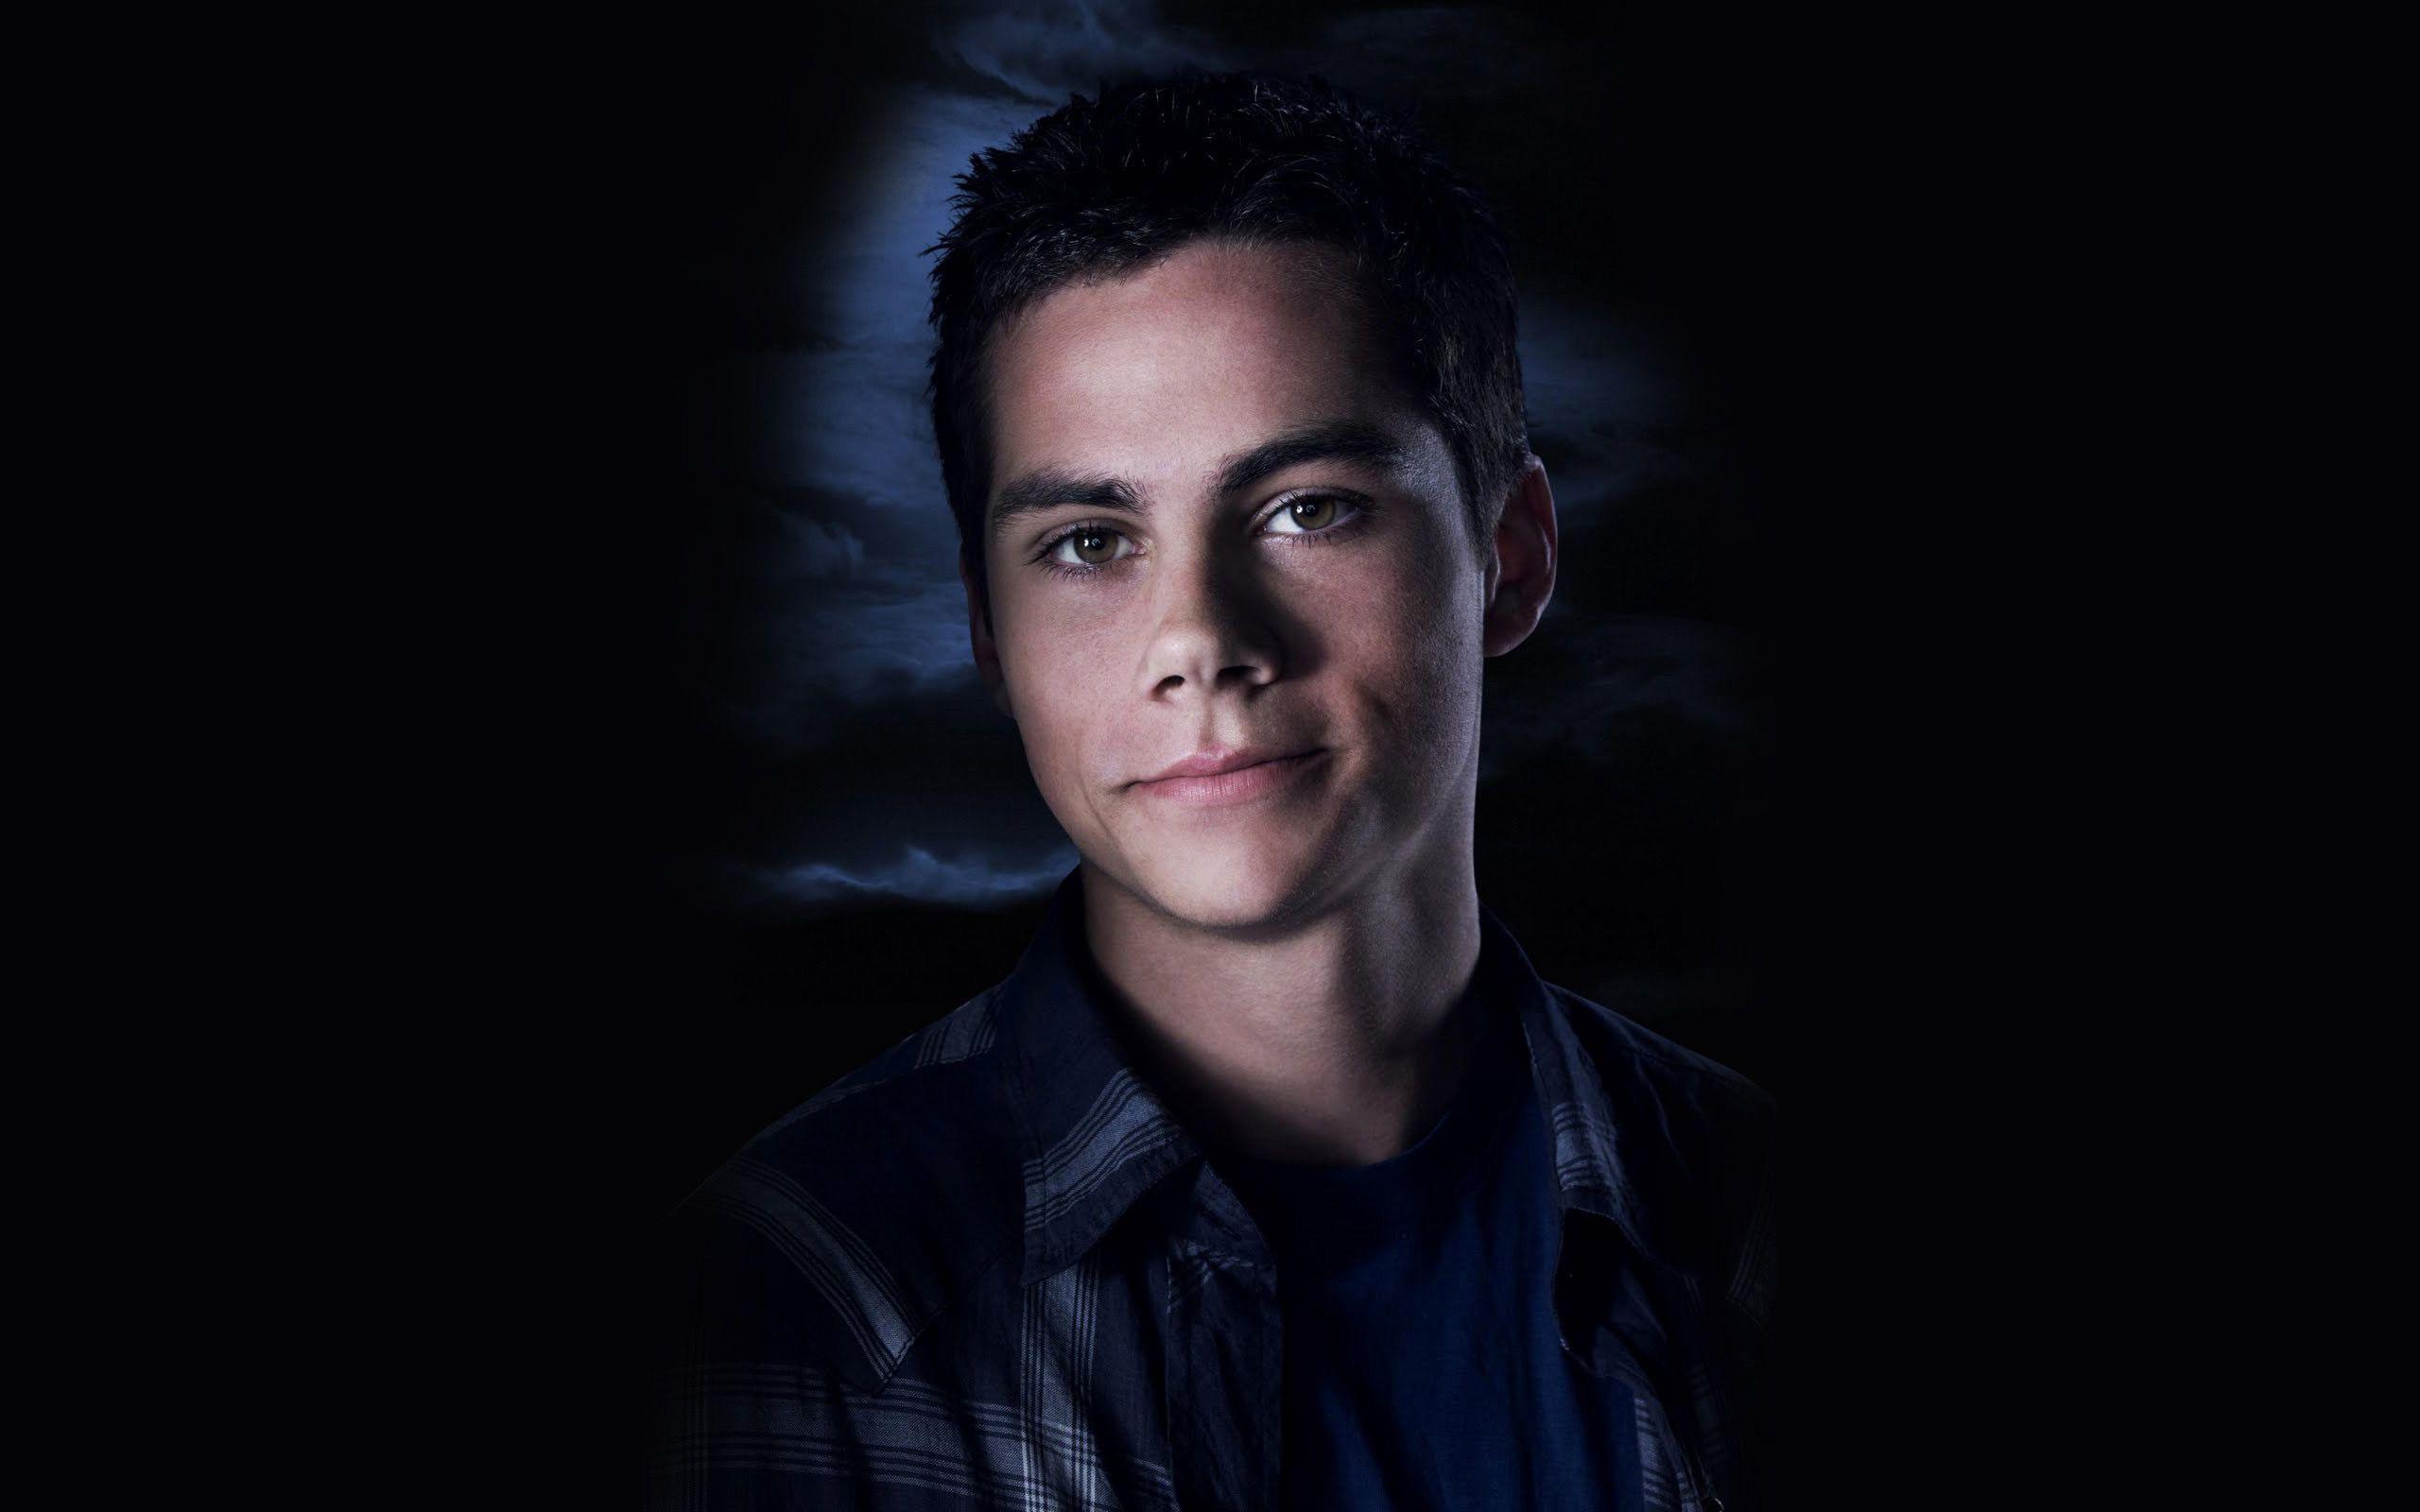 Dylan O Brien Actor Wallpaper Background 55919 2560x1600 px